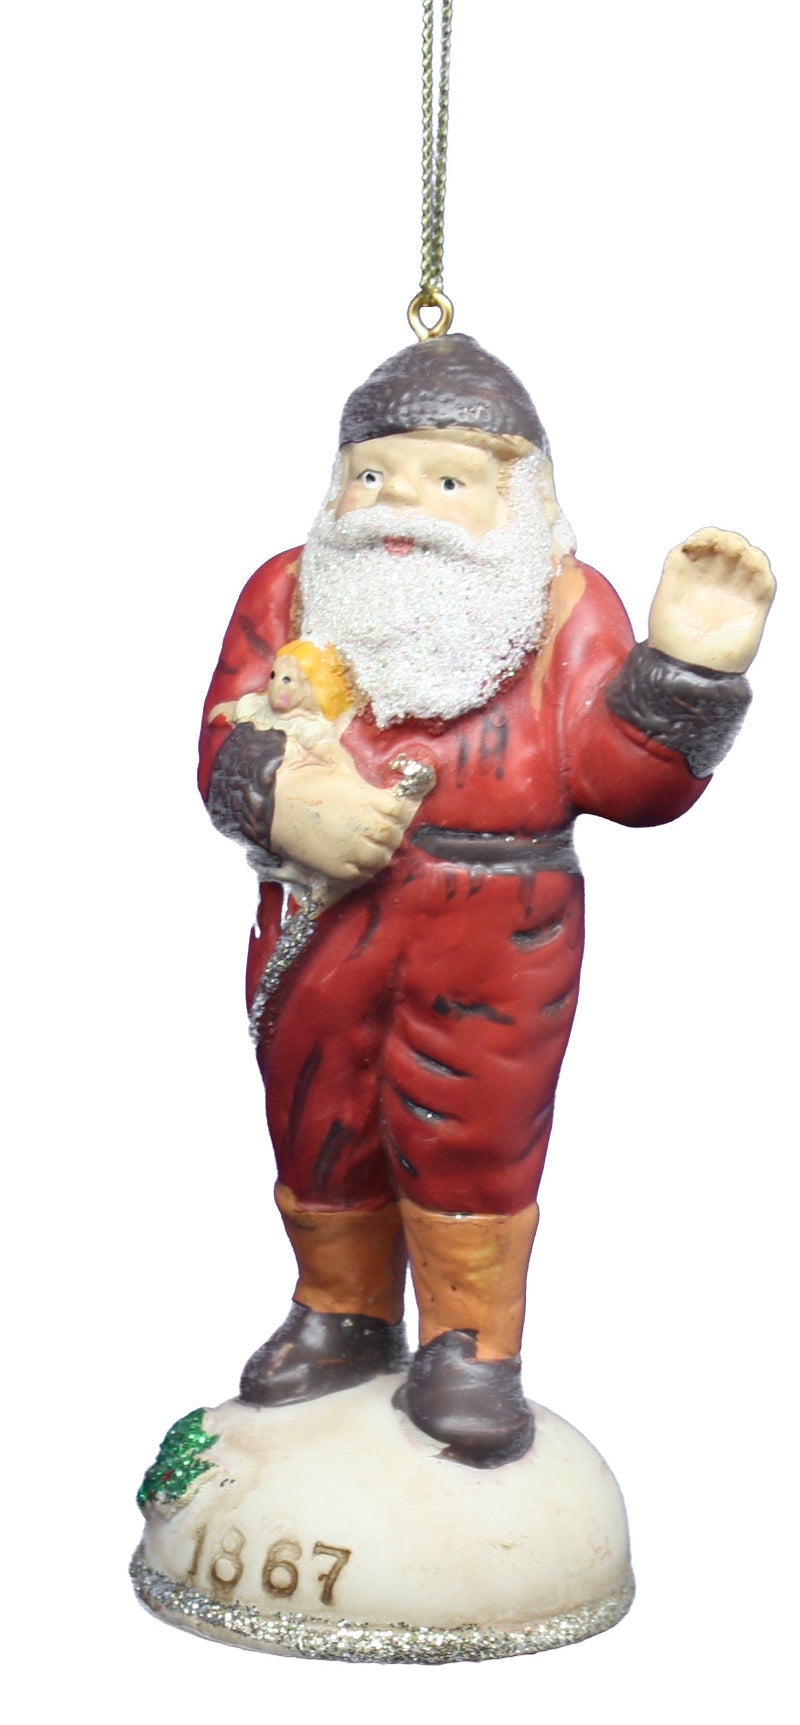 Santa Thru The Ages Ornament - 1867 - The Country Christmas Loft